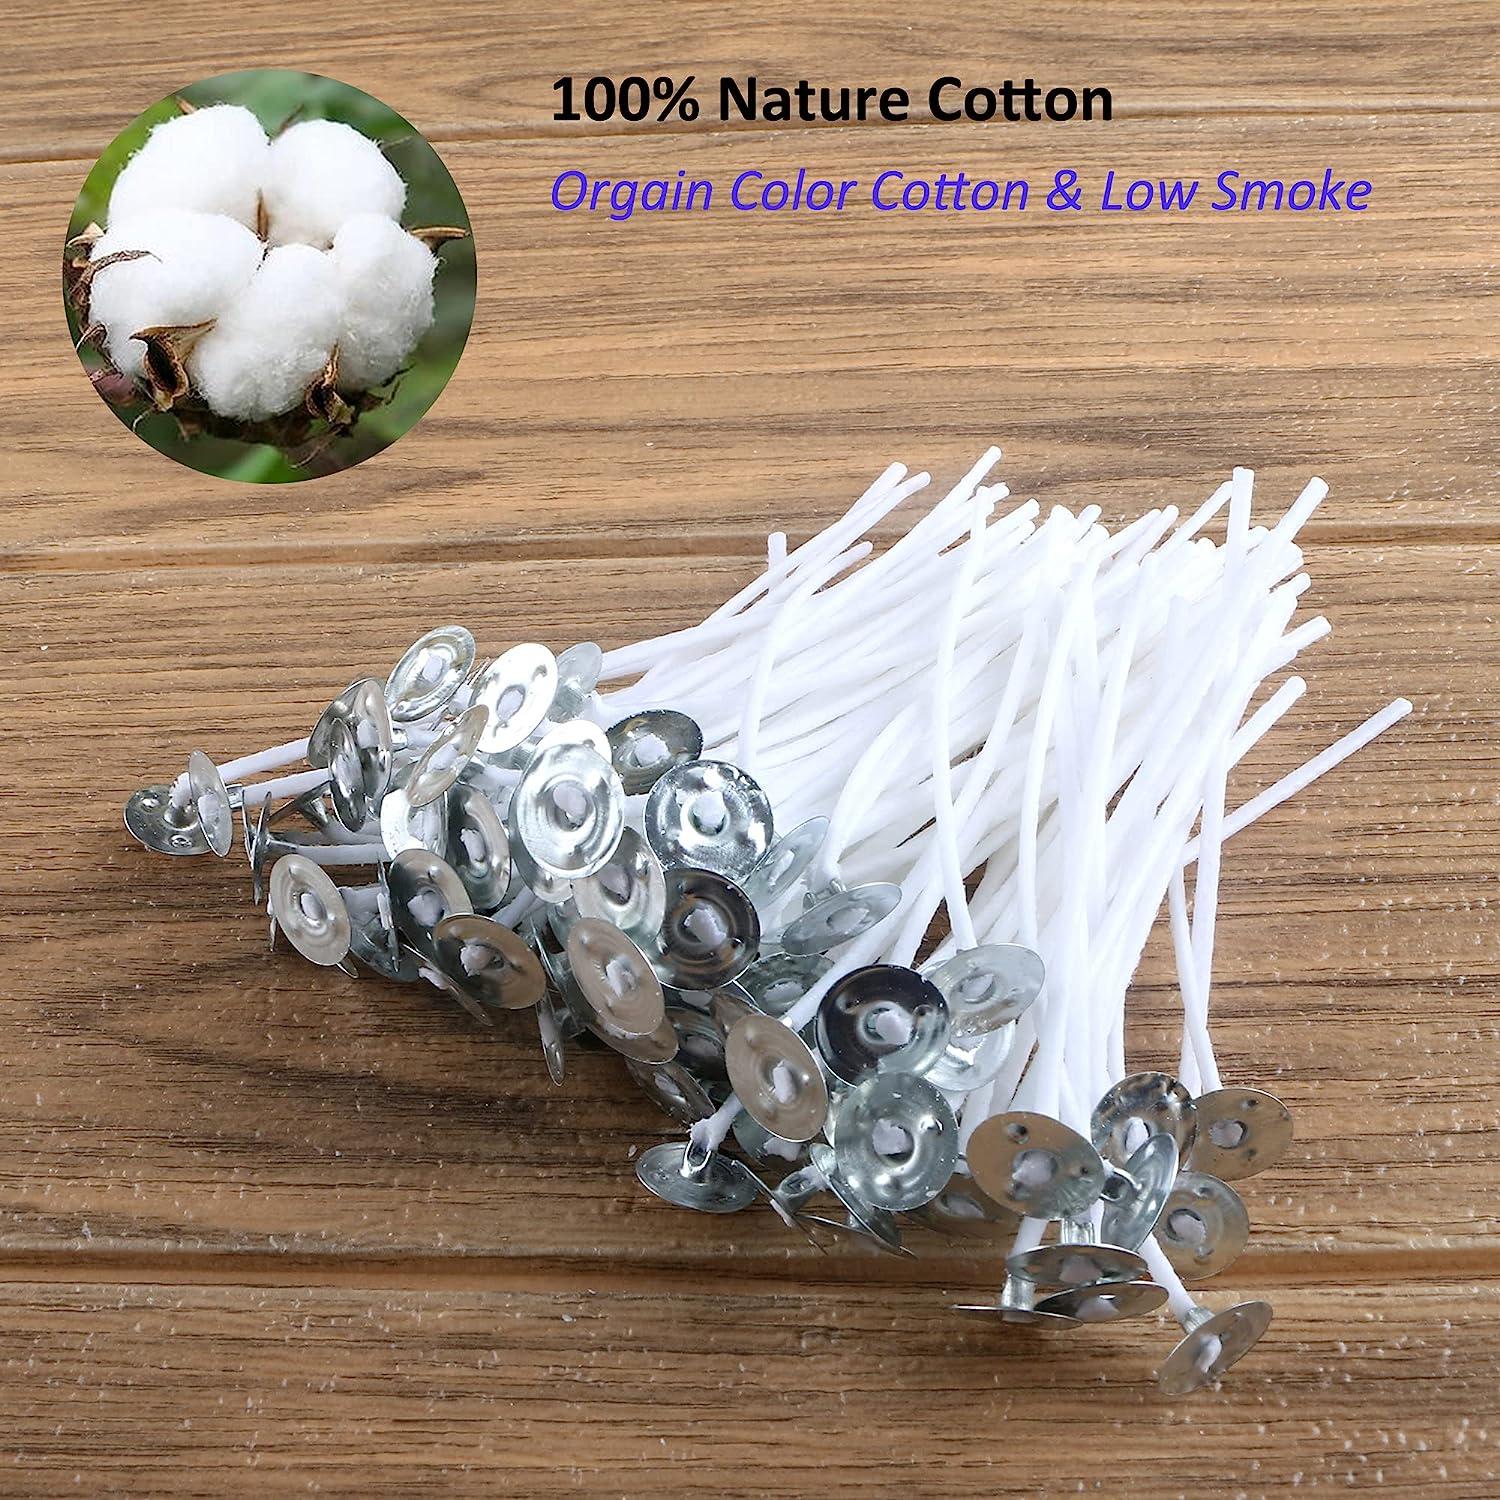 Candle Wicks 6 inch Cotton Core Candle Making Supplies Pre Tabbed 100pcs New, White